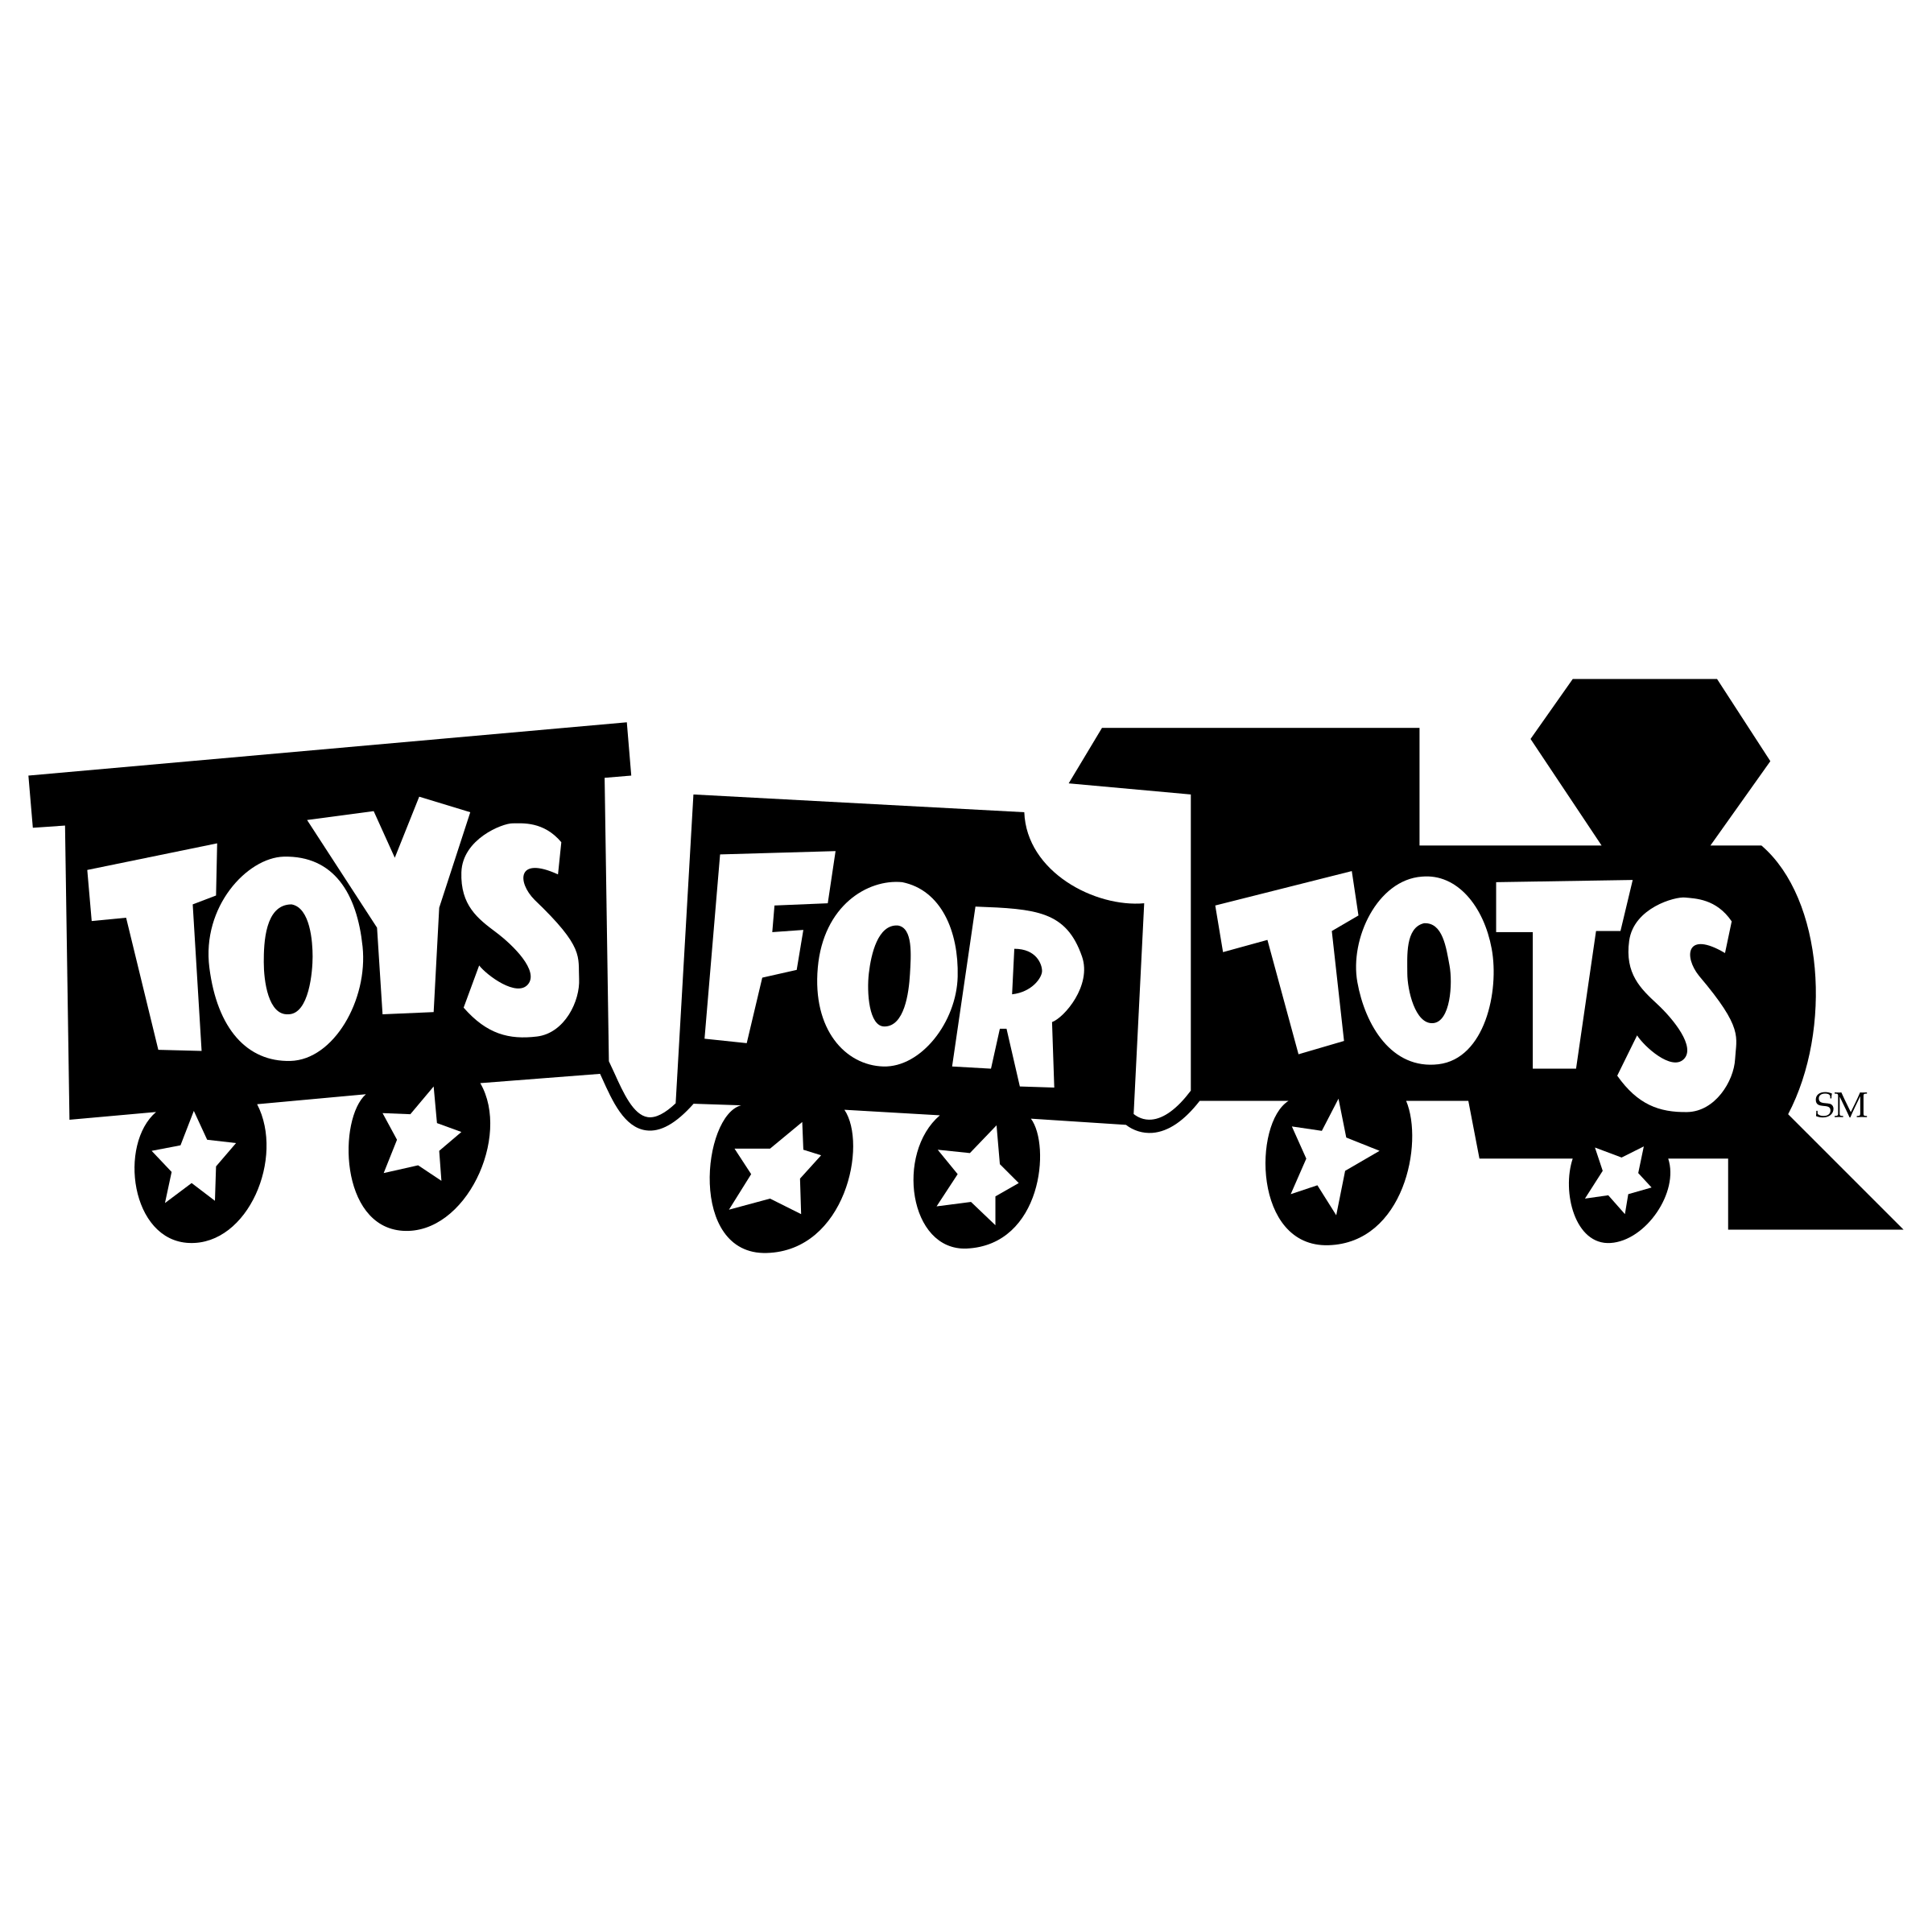 Black and White Toys for Tots Logo - Toys For Tots Logo PNG Transparent & SVG Vector